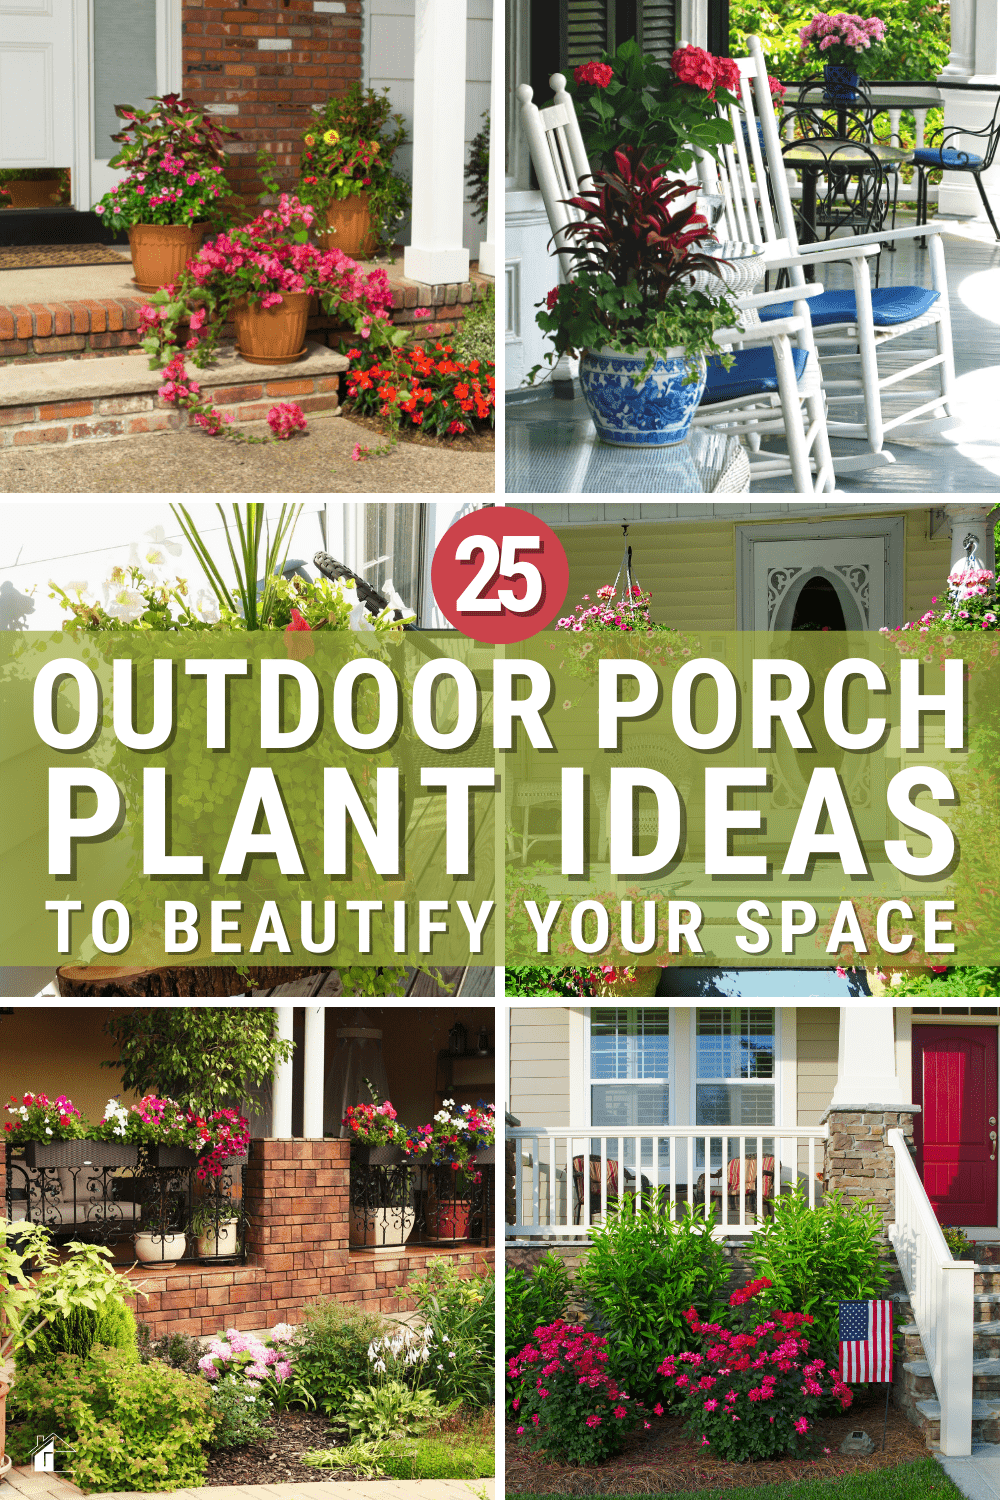 Want to add some life (and color) to your porch? Check out these 25 outdoor porch plant ideas that will beautify your space! via @mystayathome